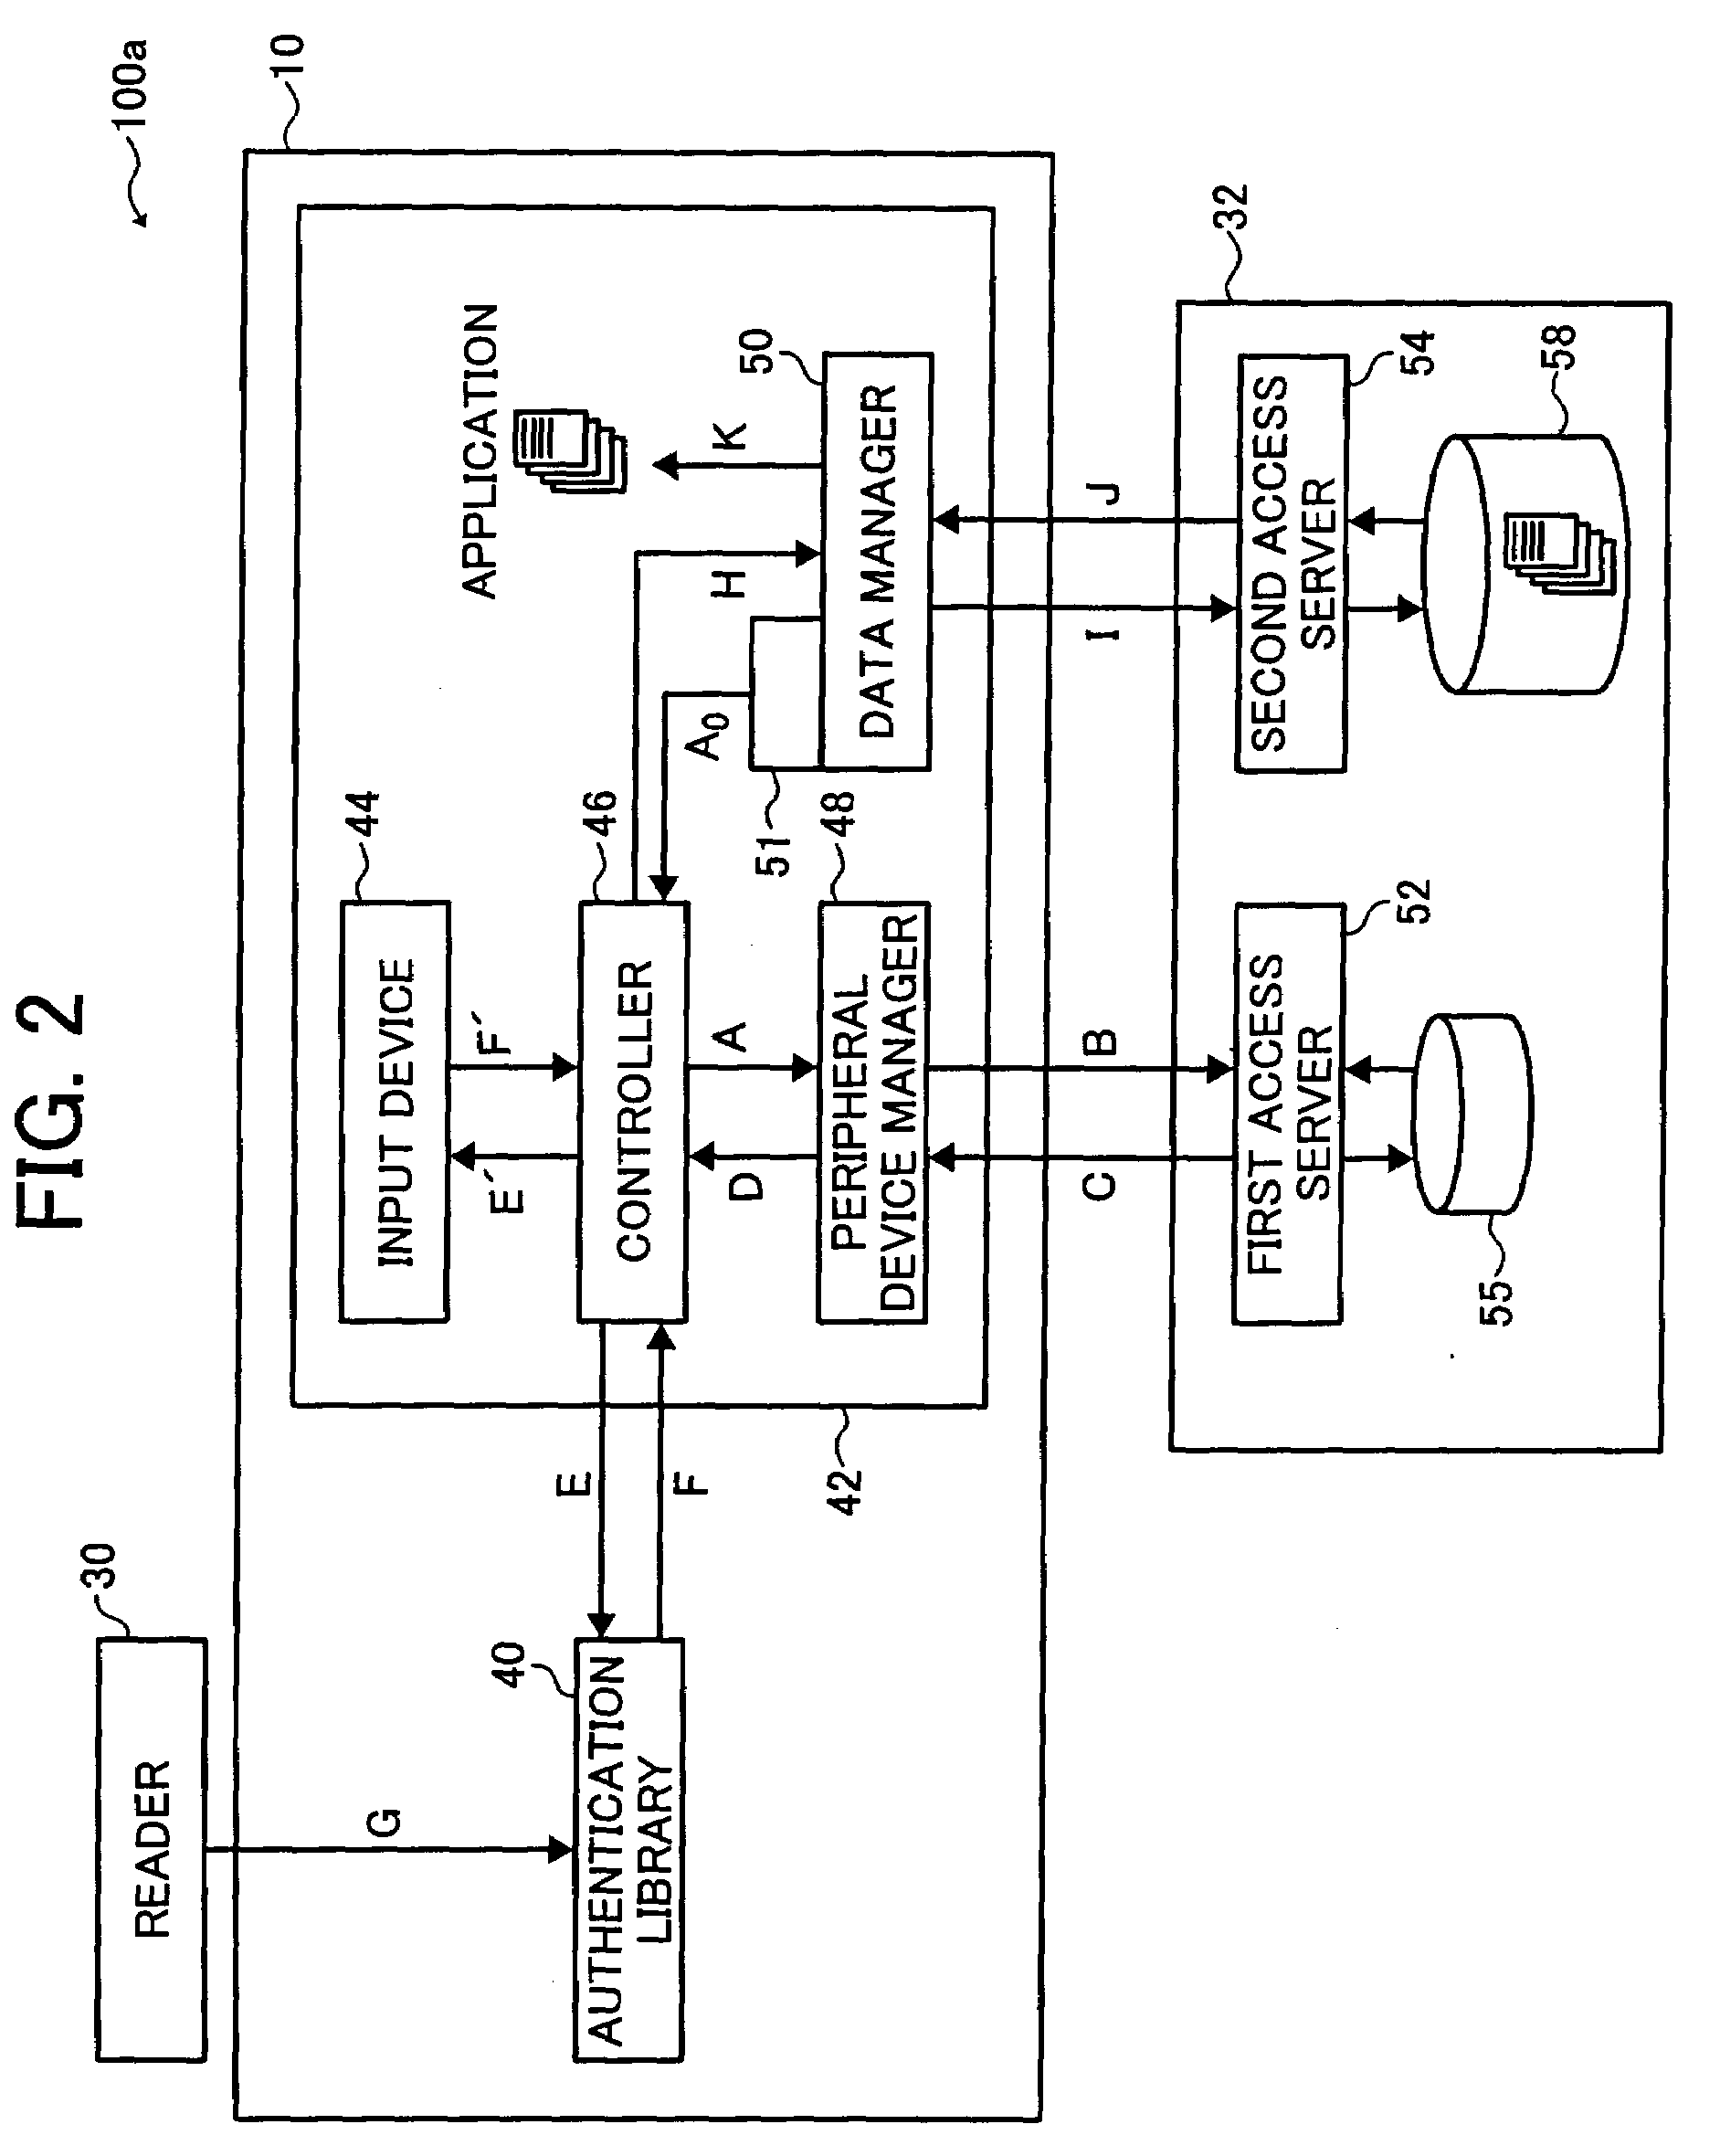 Data processor, peripheral device, and recording medium used herewith